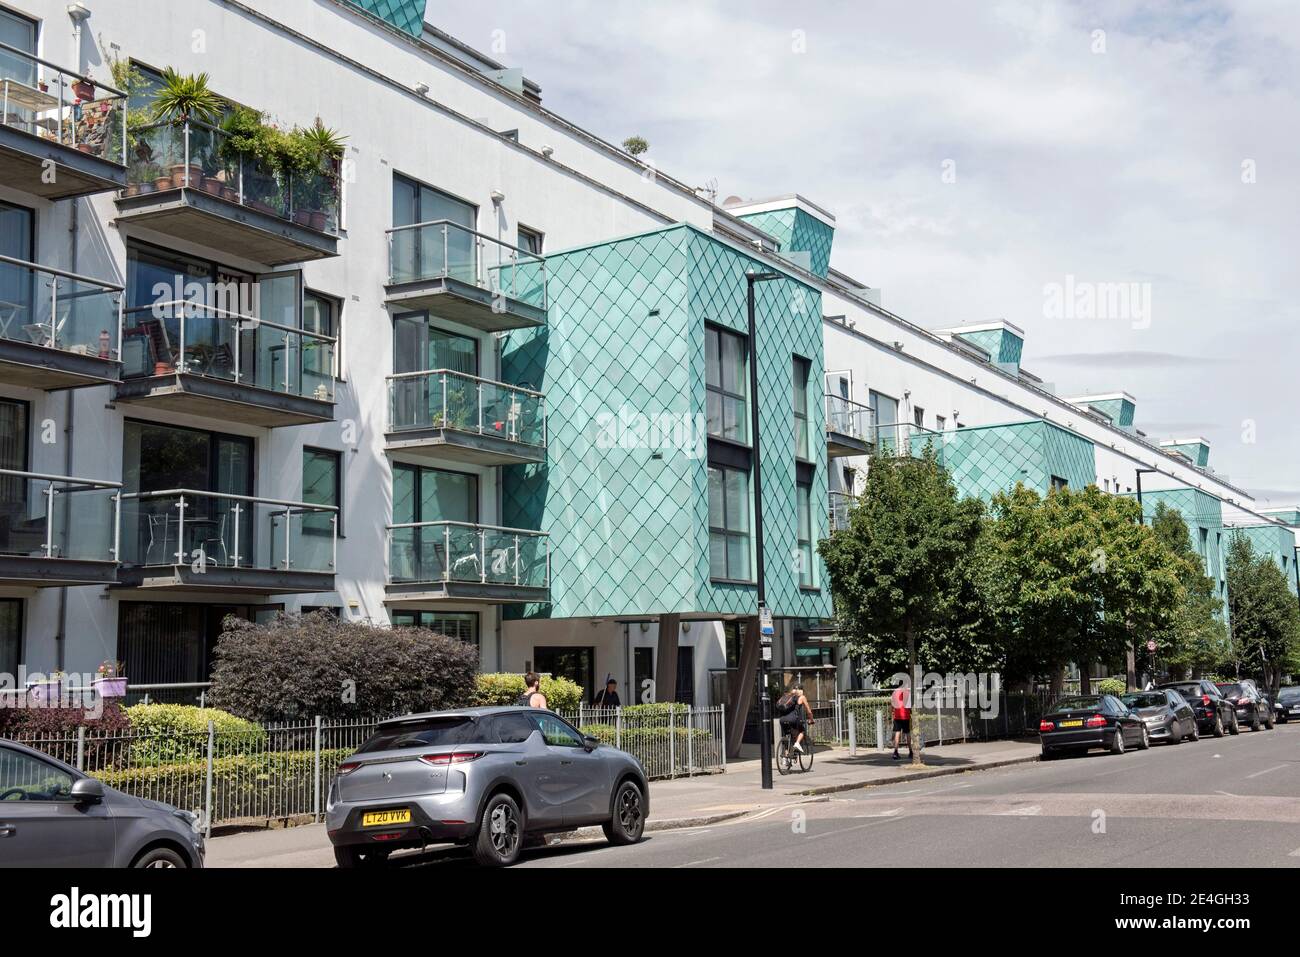 Flats or appartments with turquoise architectural patina copper cladding, with people passing Drayton Park Highbury London Borough of Islington Stock Photo